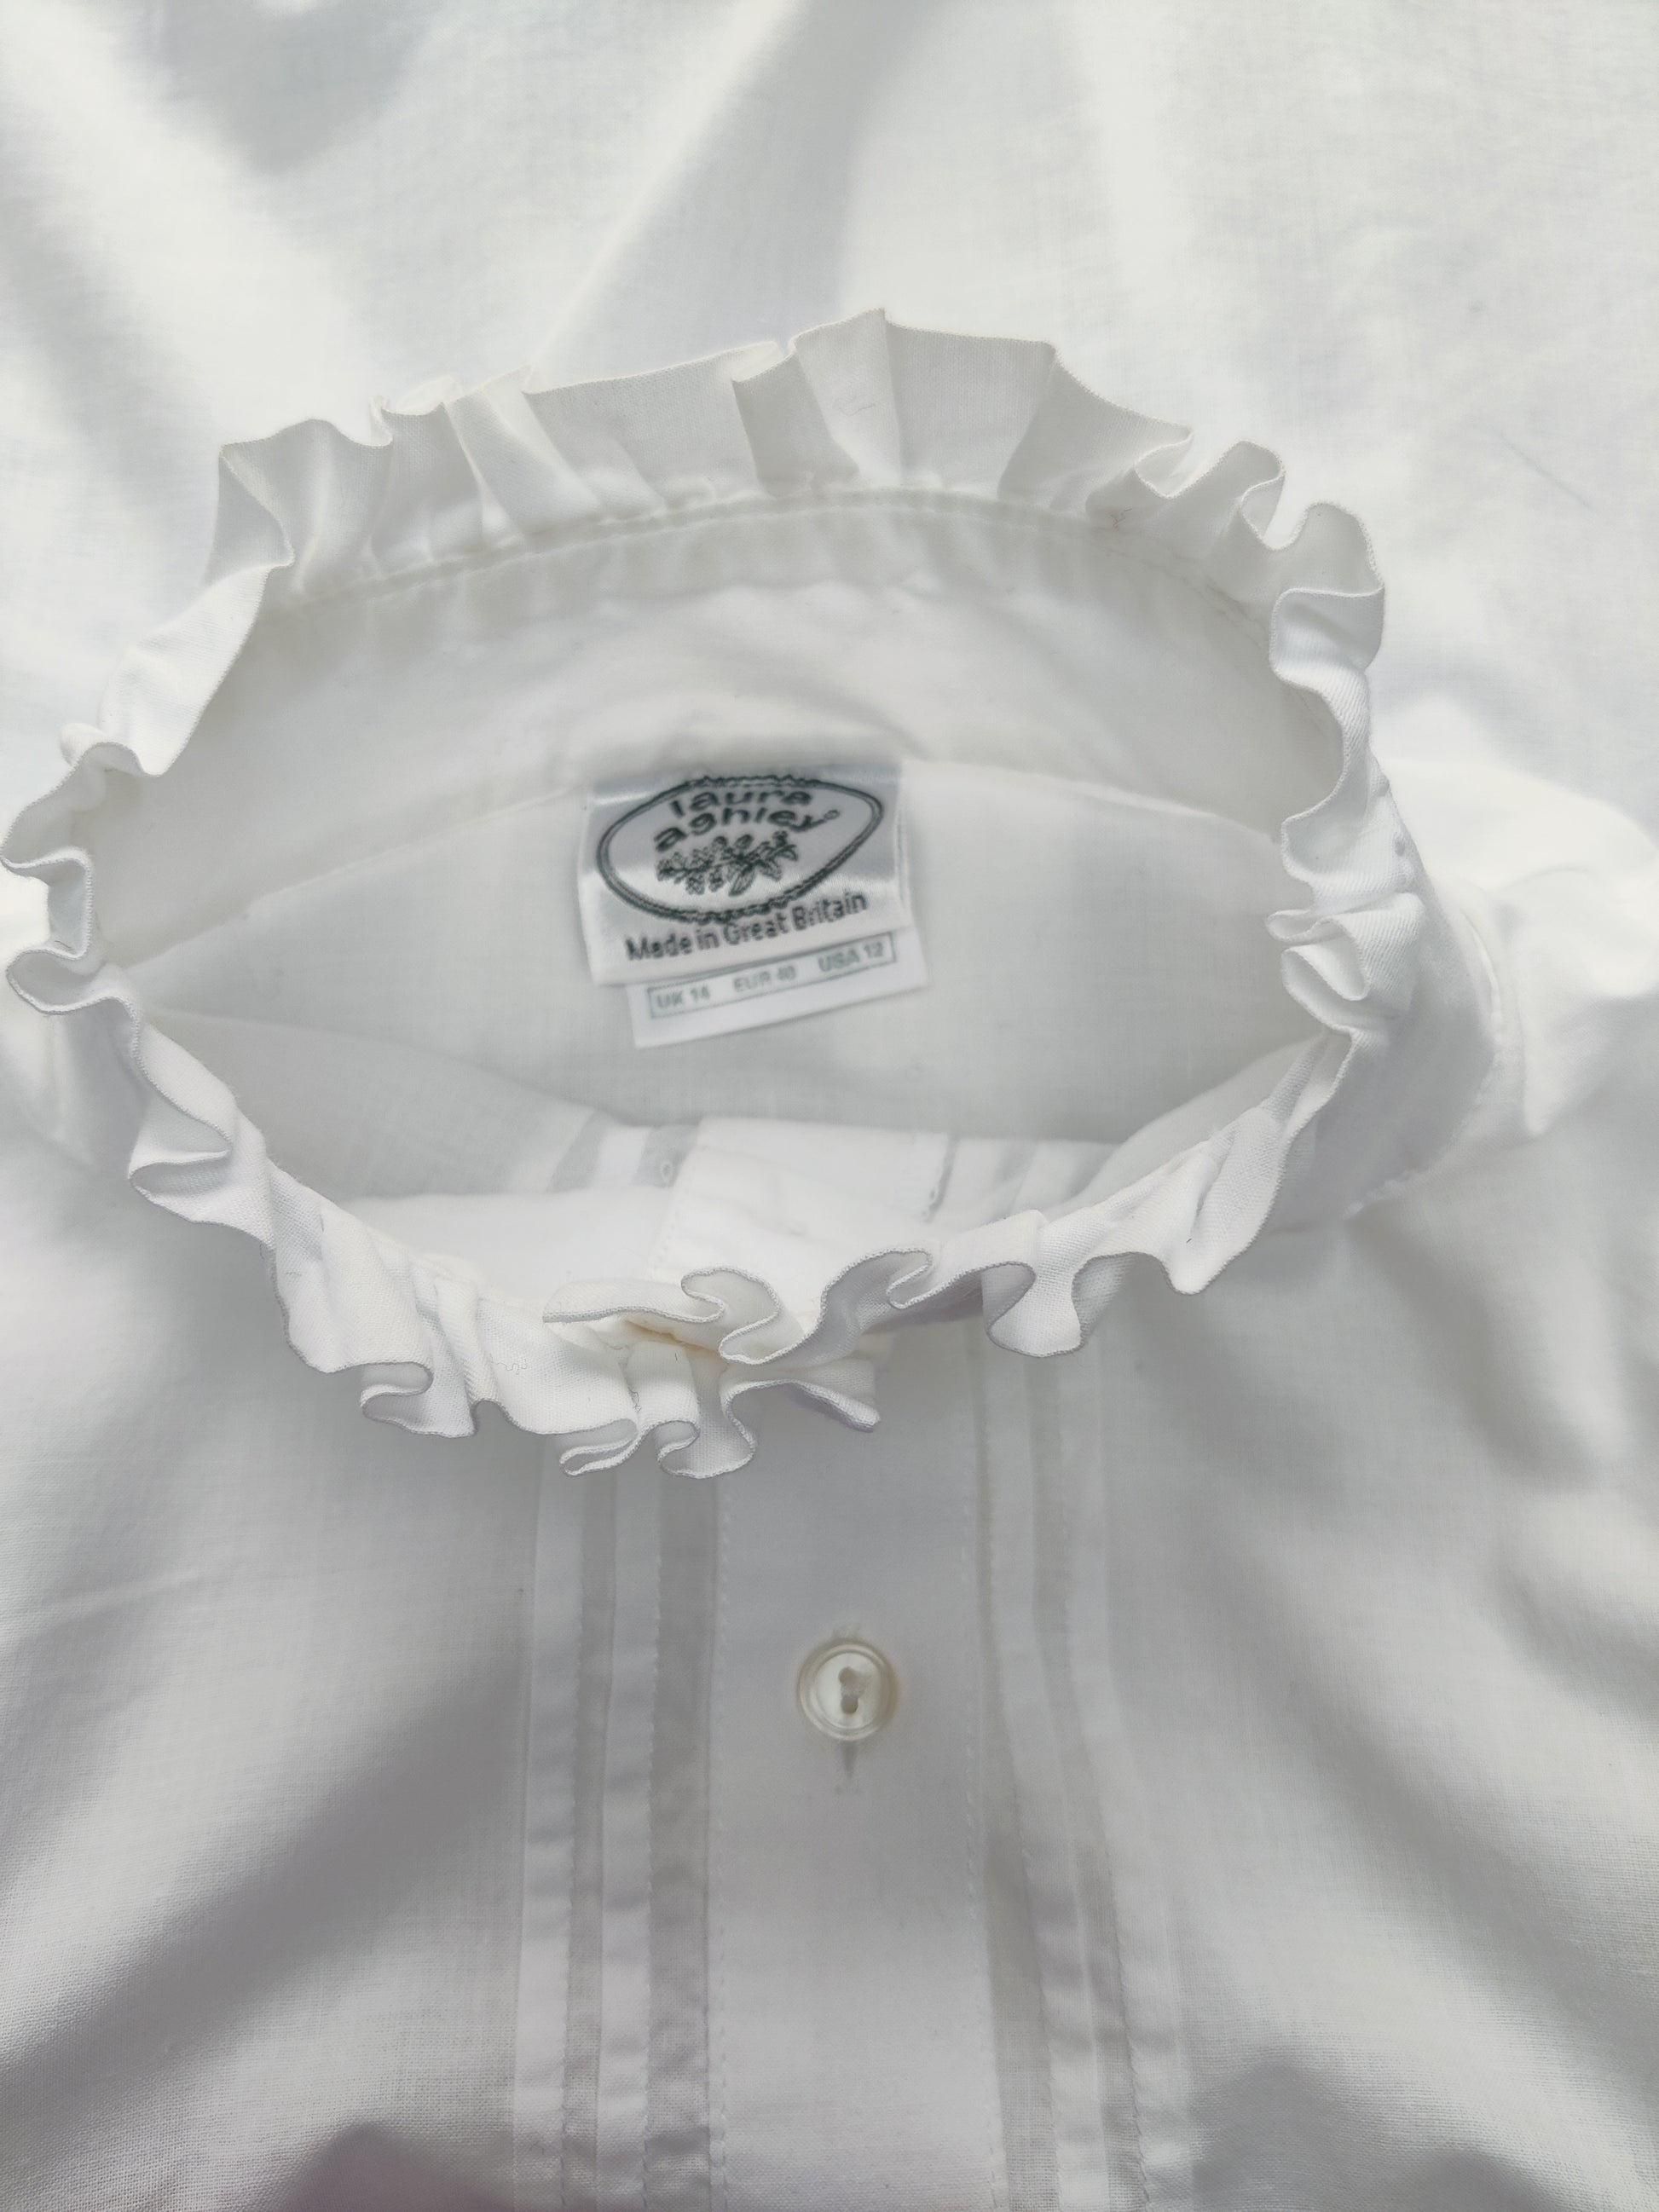 Vintage Laura Ashley white shirt with high neck 